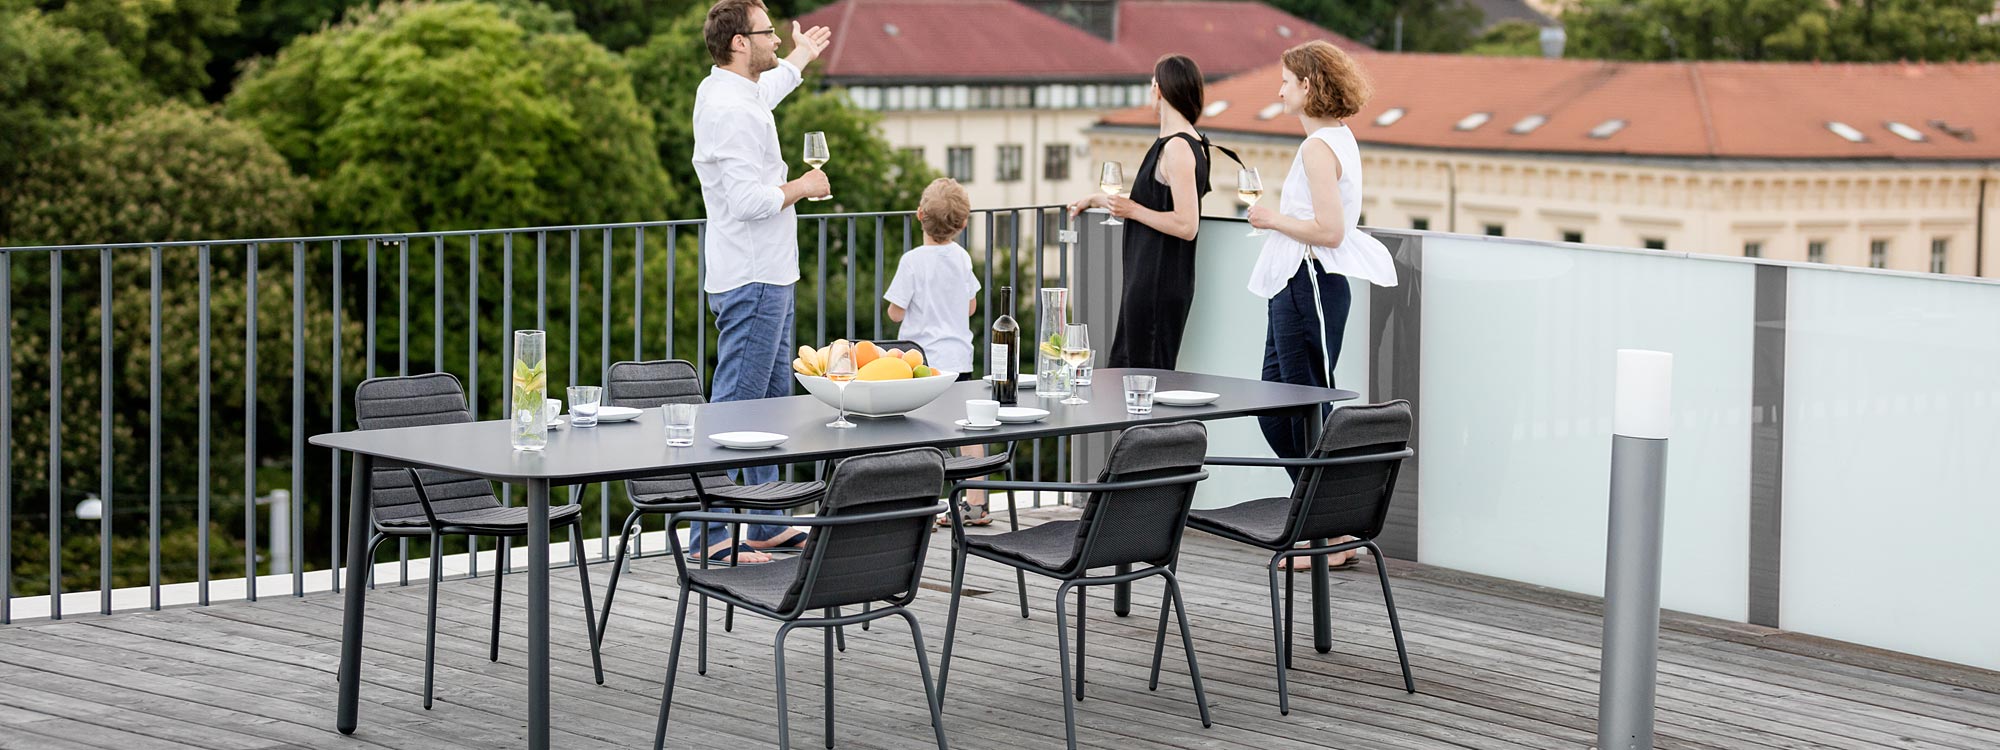 Image of adults and children on rooftop terrace at dusk, next to Starling modern garden table and outdoor chairs